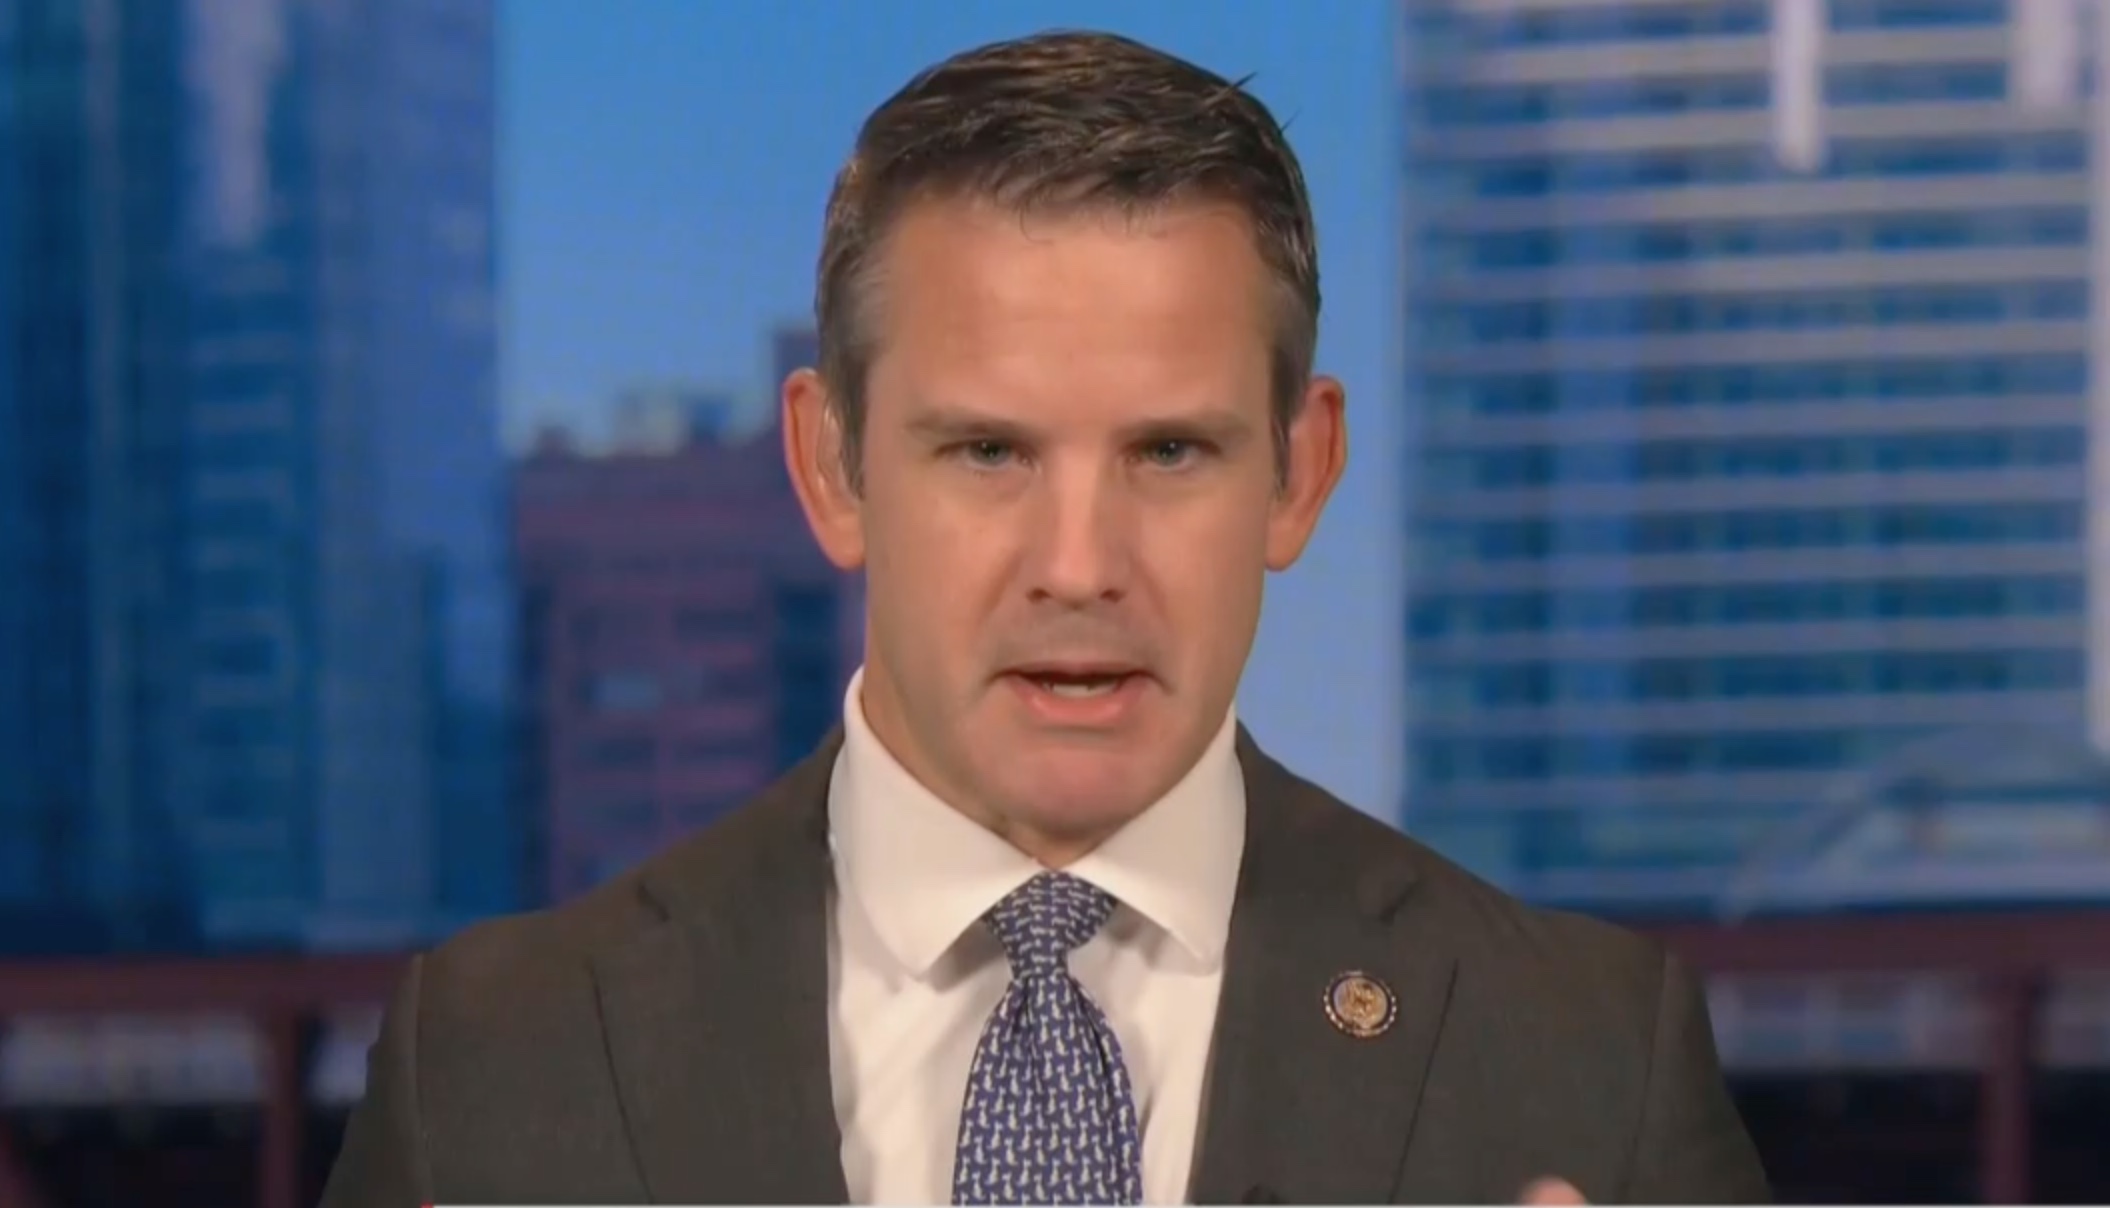 Adam Kinzinger Shuts Down ‘One More’ Ted Cruz ‘Conspiracy’: Ray Epps ‘is Nothing But a Jan. 6 Protest Attendee’